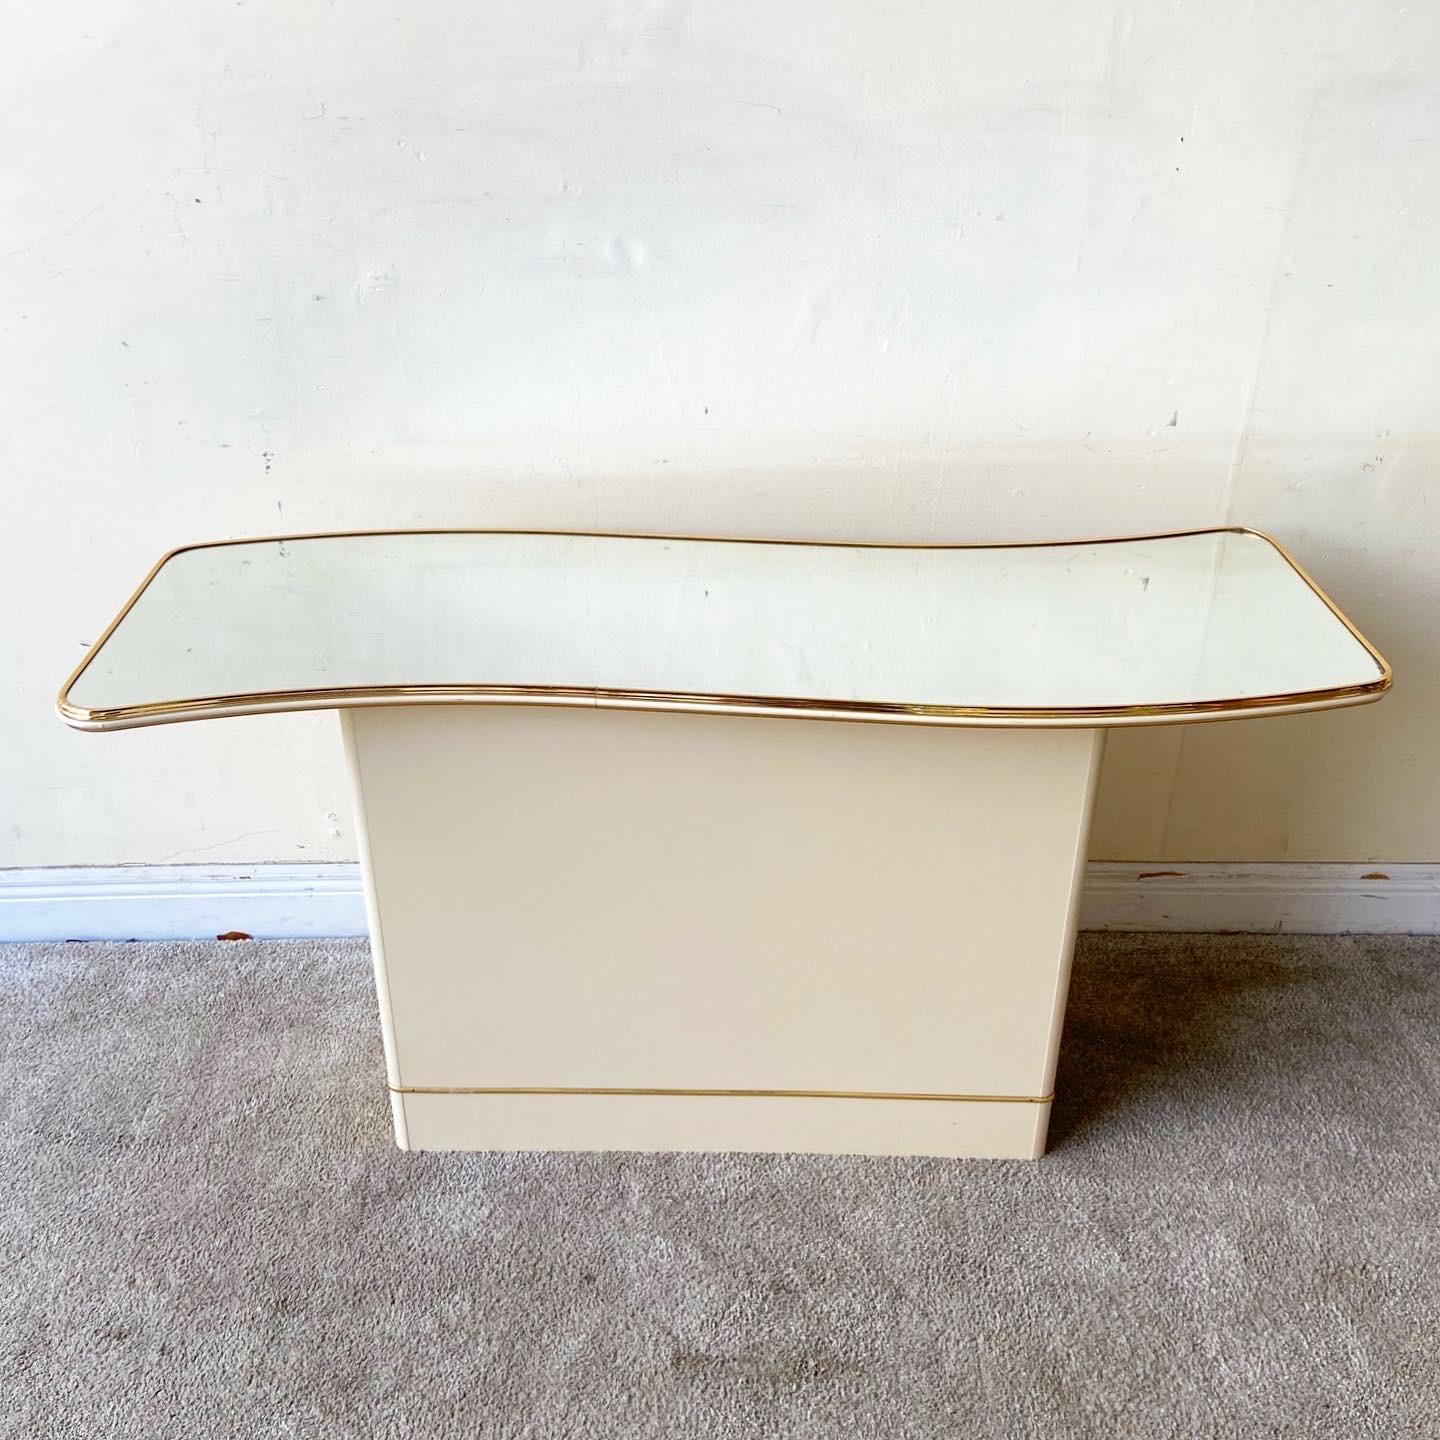 Postmodern Wavy Mirrored Top Console Table With Gold Trim In Good Condition For Sale In Delray Beach, FL